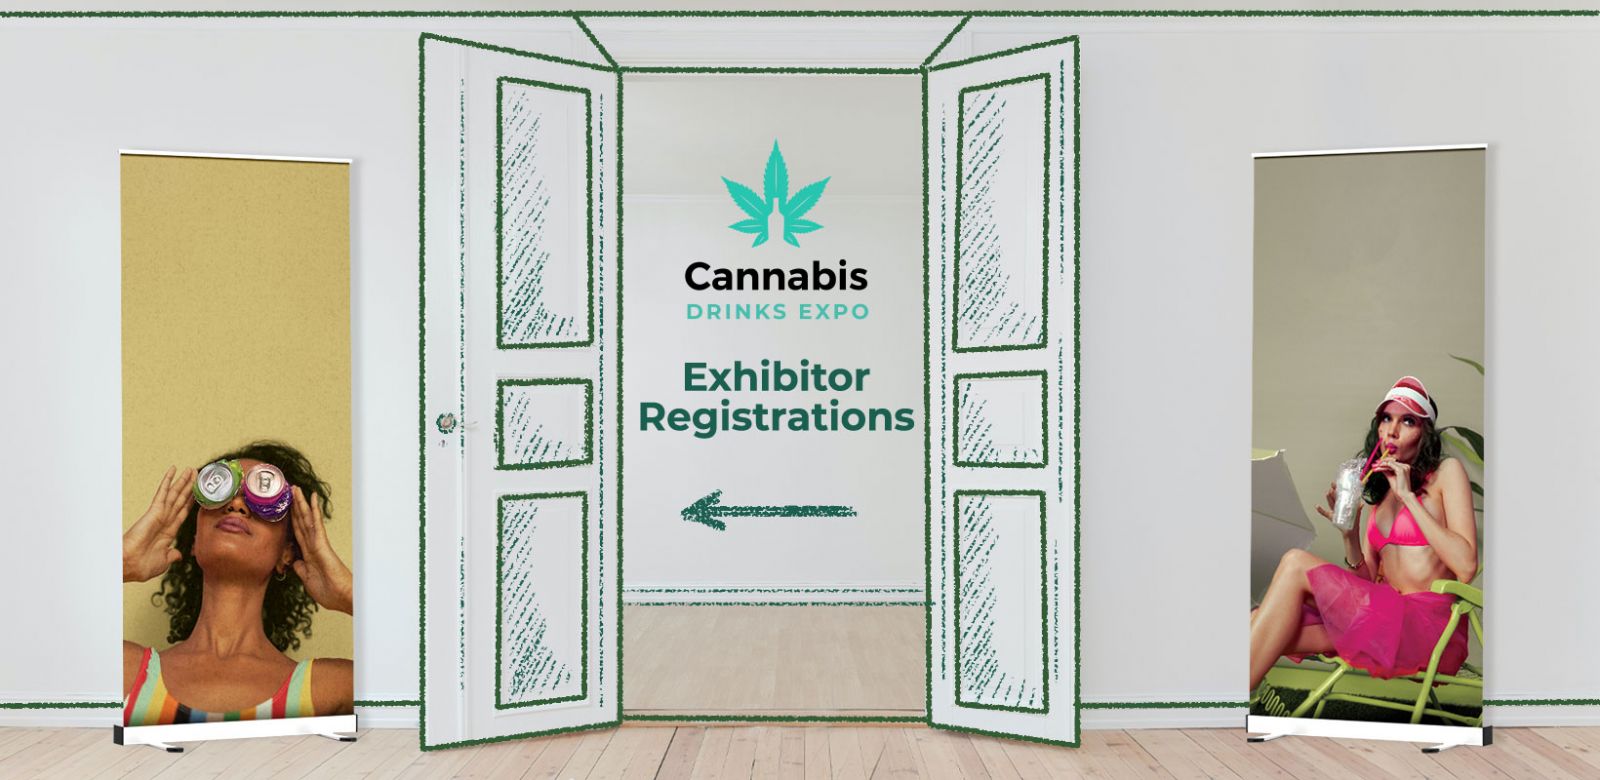 Photo for: 2022 Cannabis Drinks Expo Exhibitor Registrations Now Open